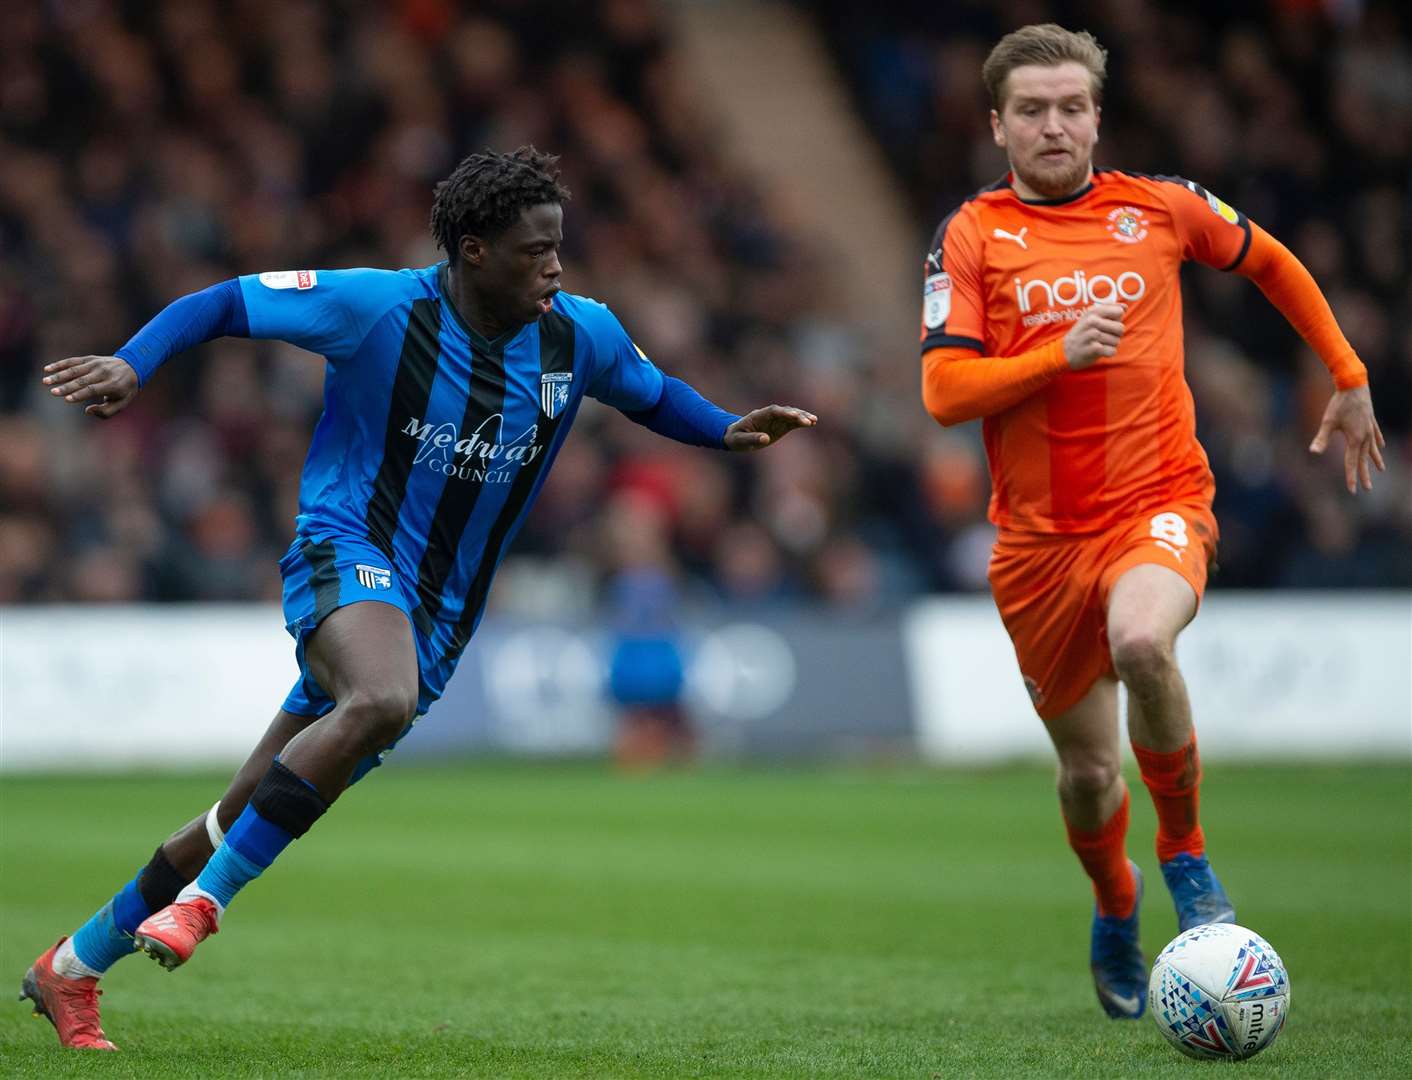 Gillingham's Leo Da Silva Lopes gets to the ball before Luton's Luke Berry Picture: Ady Kerry